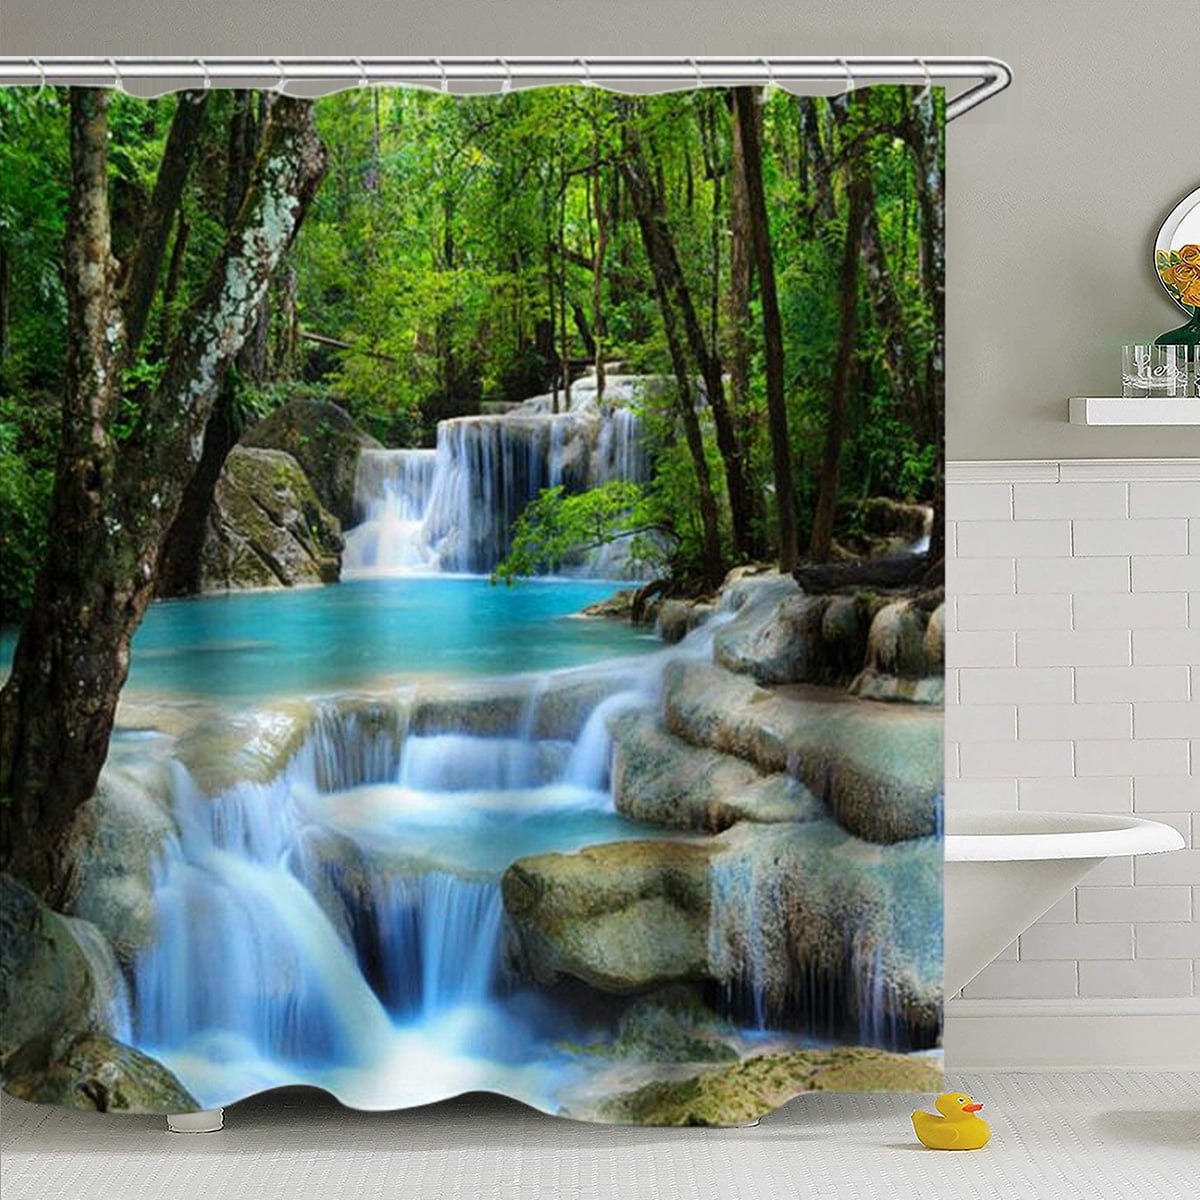 Nature Shower Curtain Dogs Near the River Bathroom Accessories Waterproo Fabric 